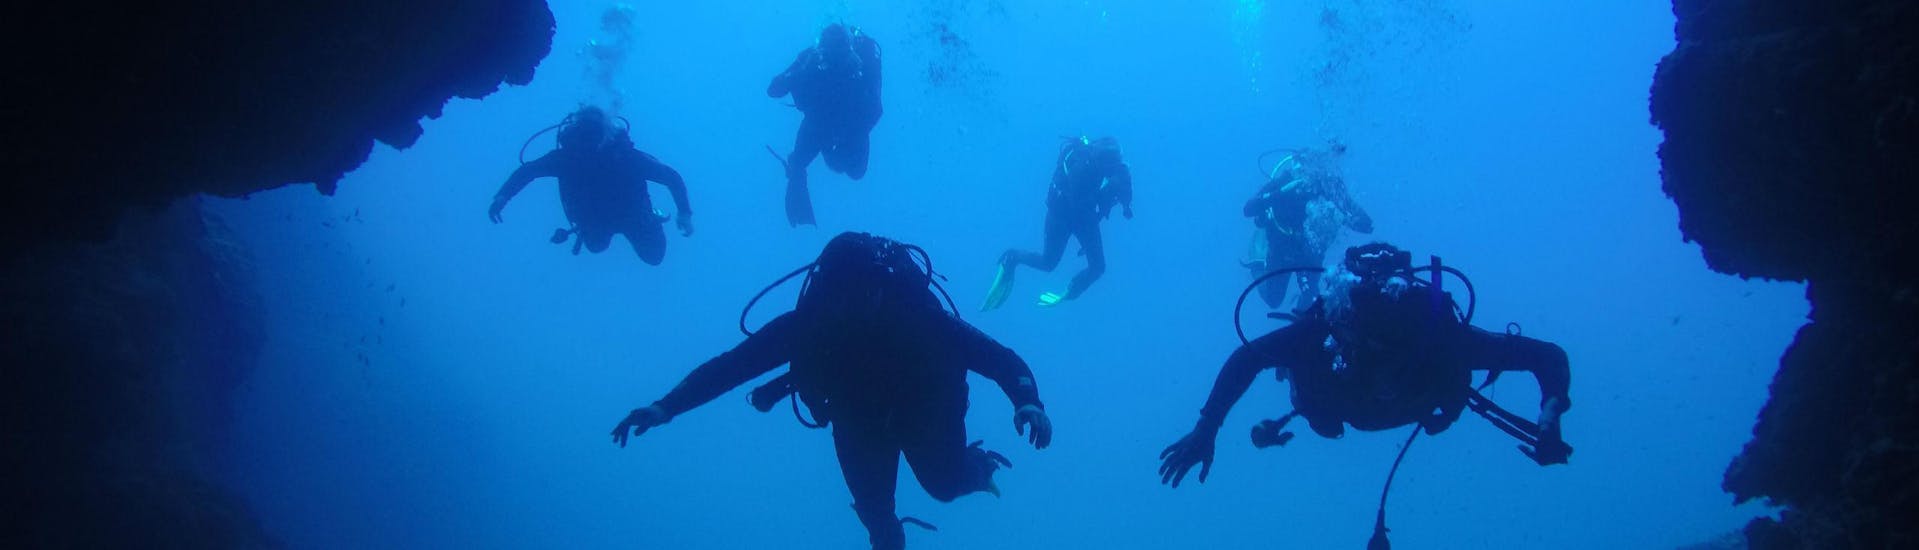 Divers underwater during Guided Dives from Dubrovnik for Certified Divers with Diving Center Blue Planet Dubrovnik.